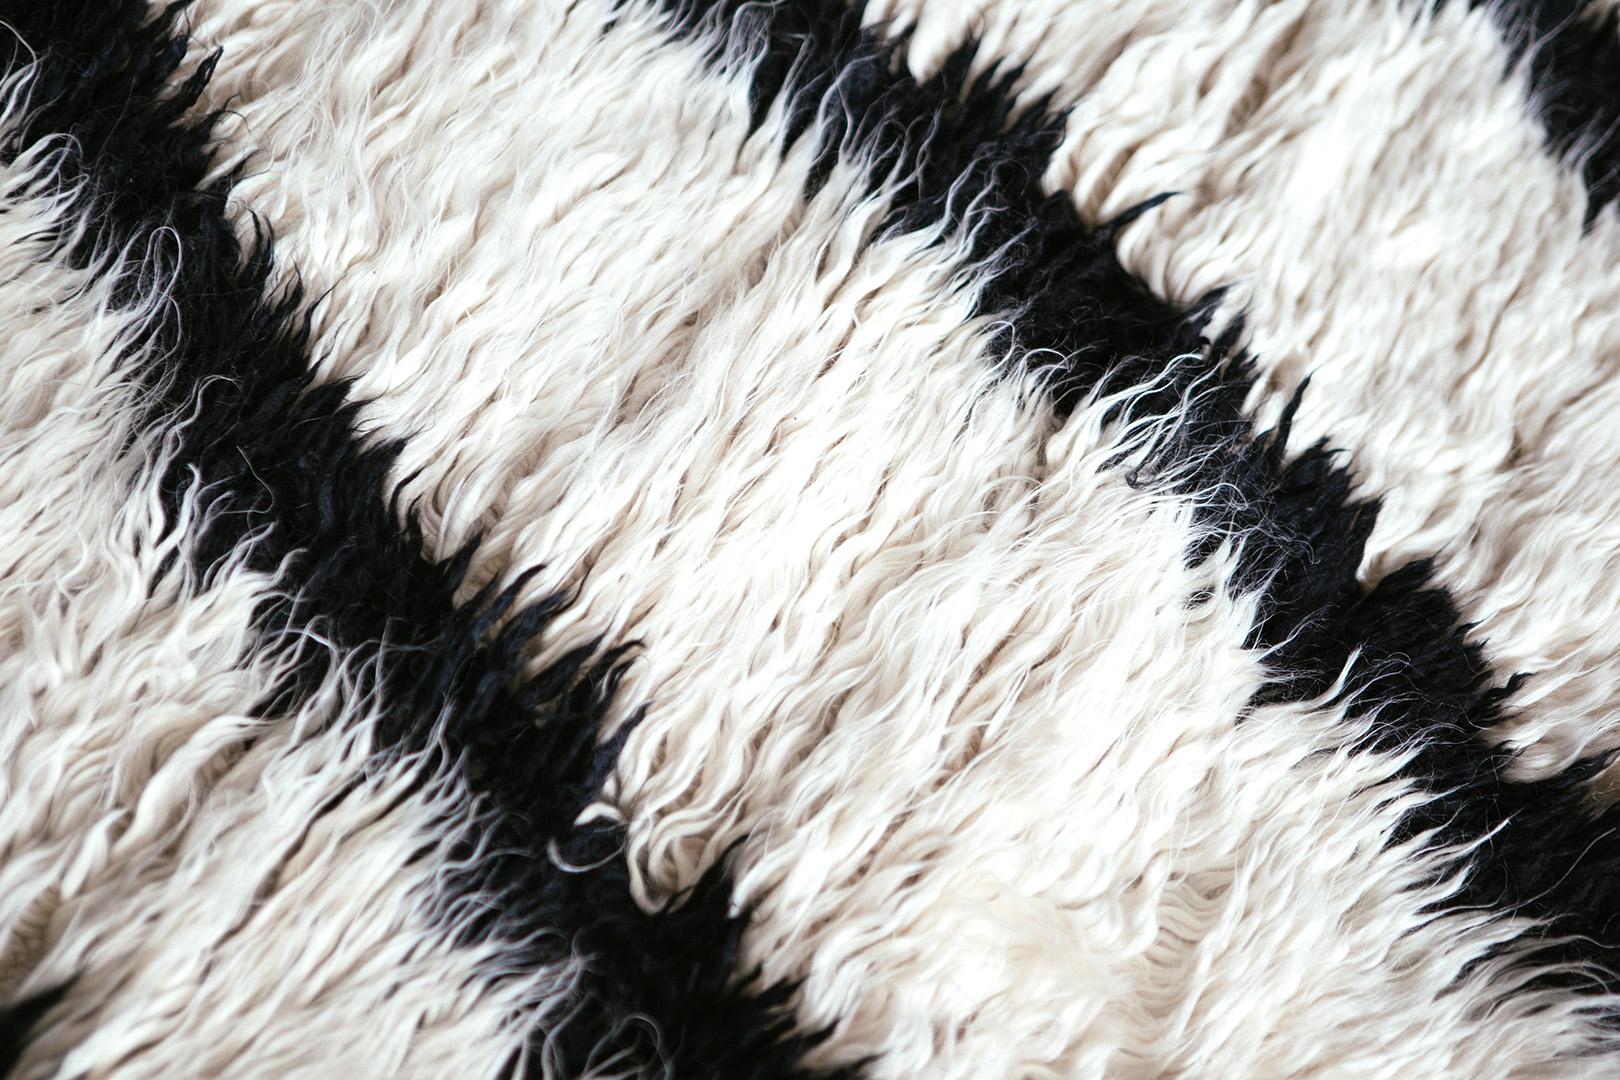 The deeply contrasting and luxurious mohair features prominently in the beauty of Profile. The abstract black and white strokes lose their edge as the fibers fall over each other at the edges. The surface is ever changing. A brushing turns the